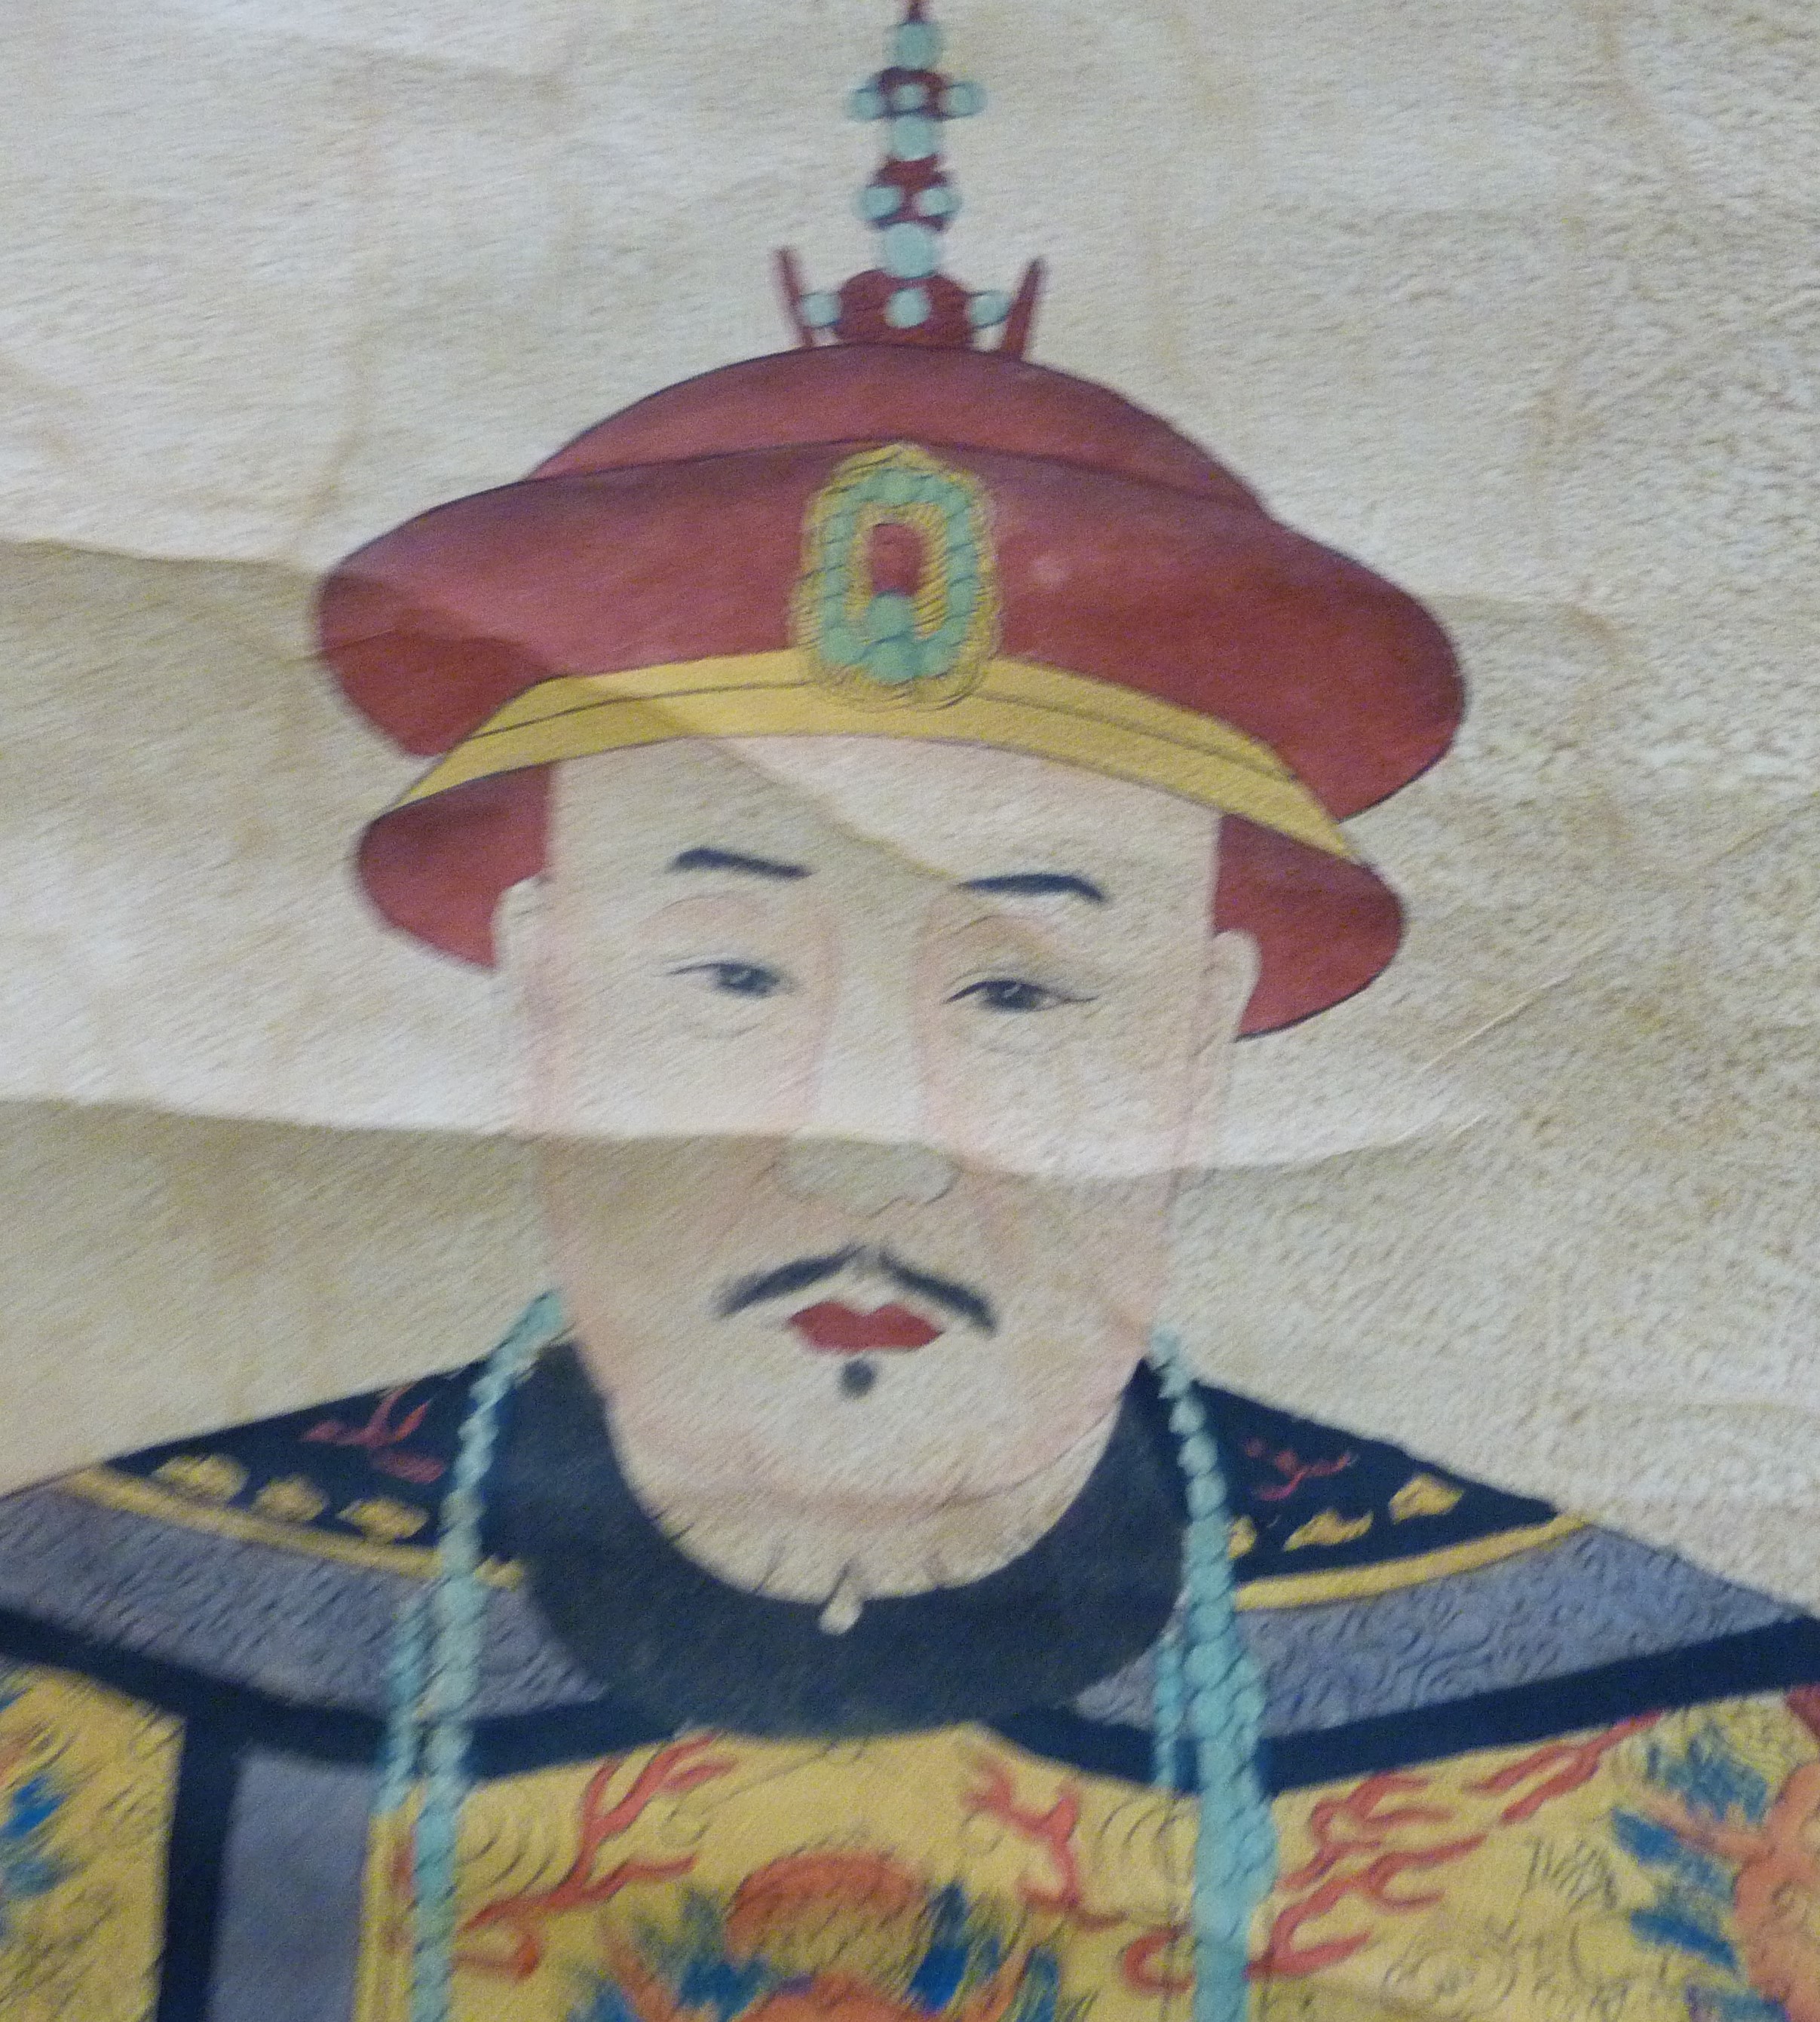 A Japanese scroll printed and painted with a portrait of an Emperor in fine robes